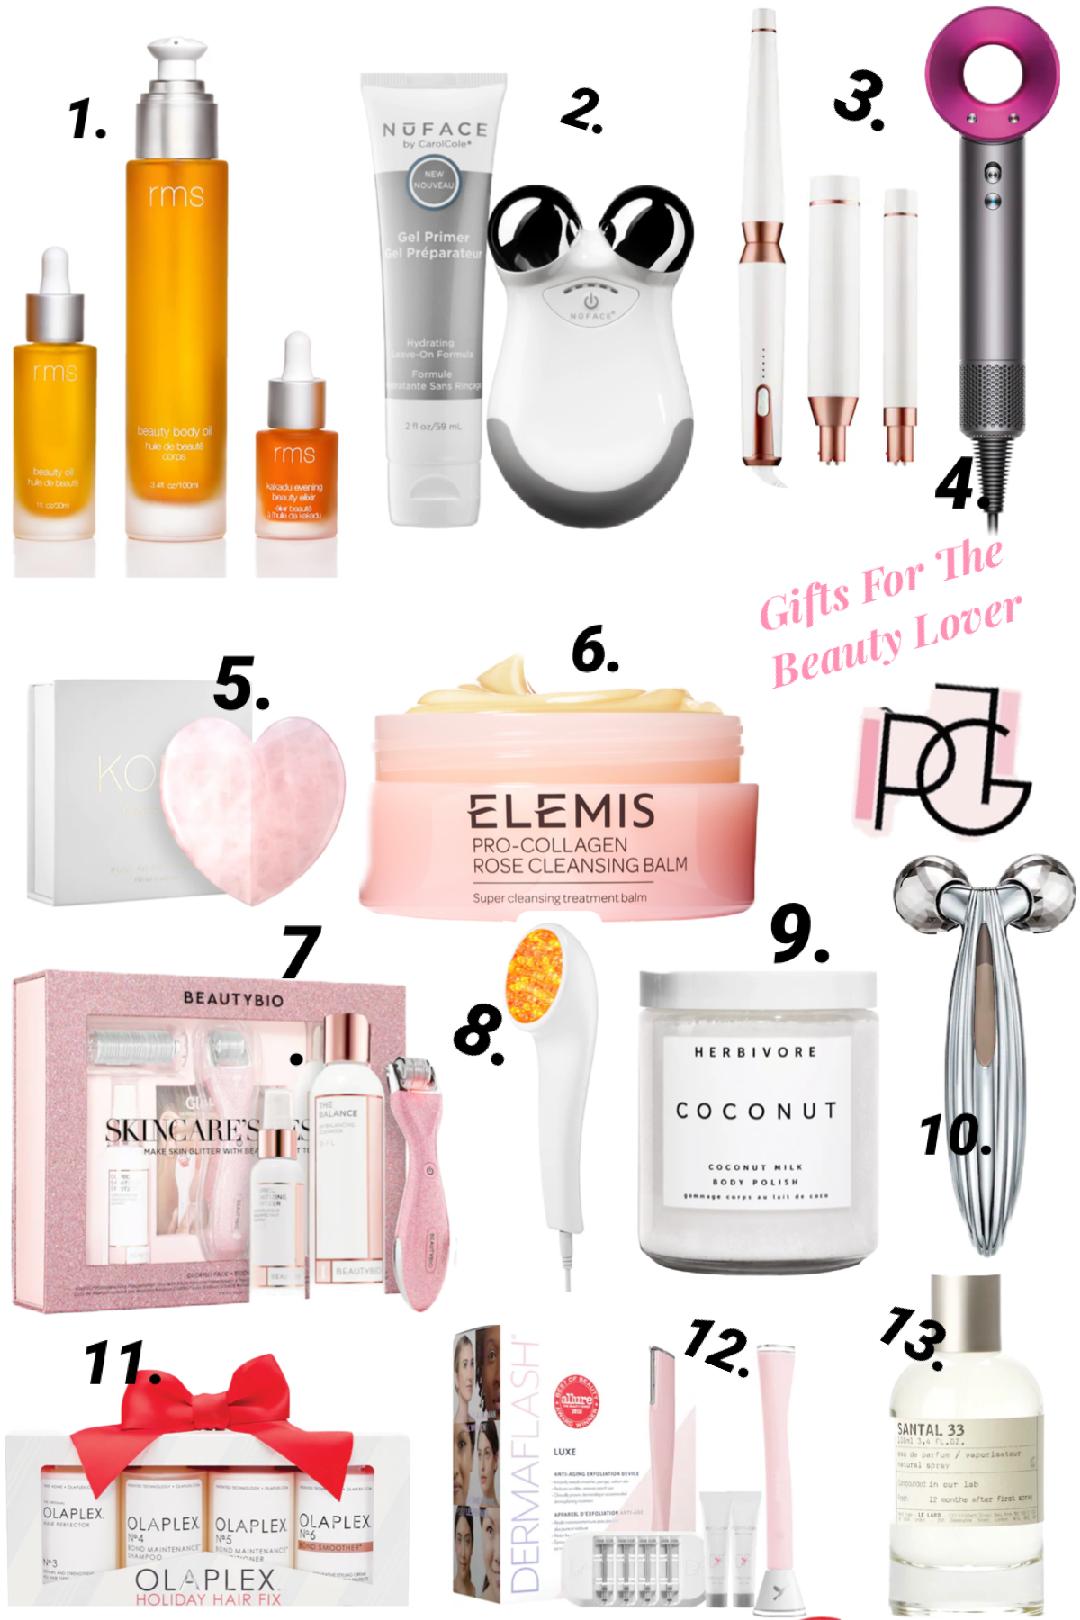 Beauty Lover Holiday Gift Guide 2020